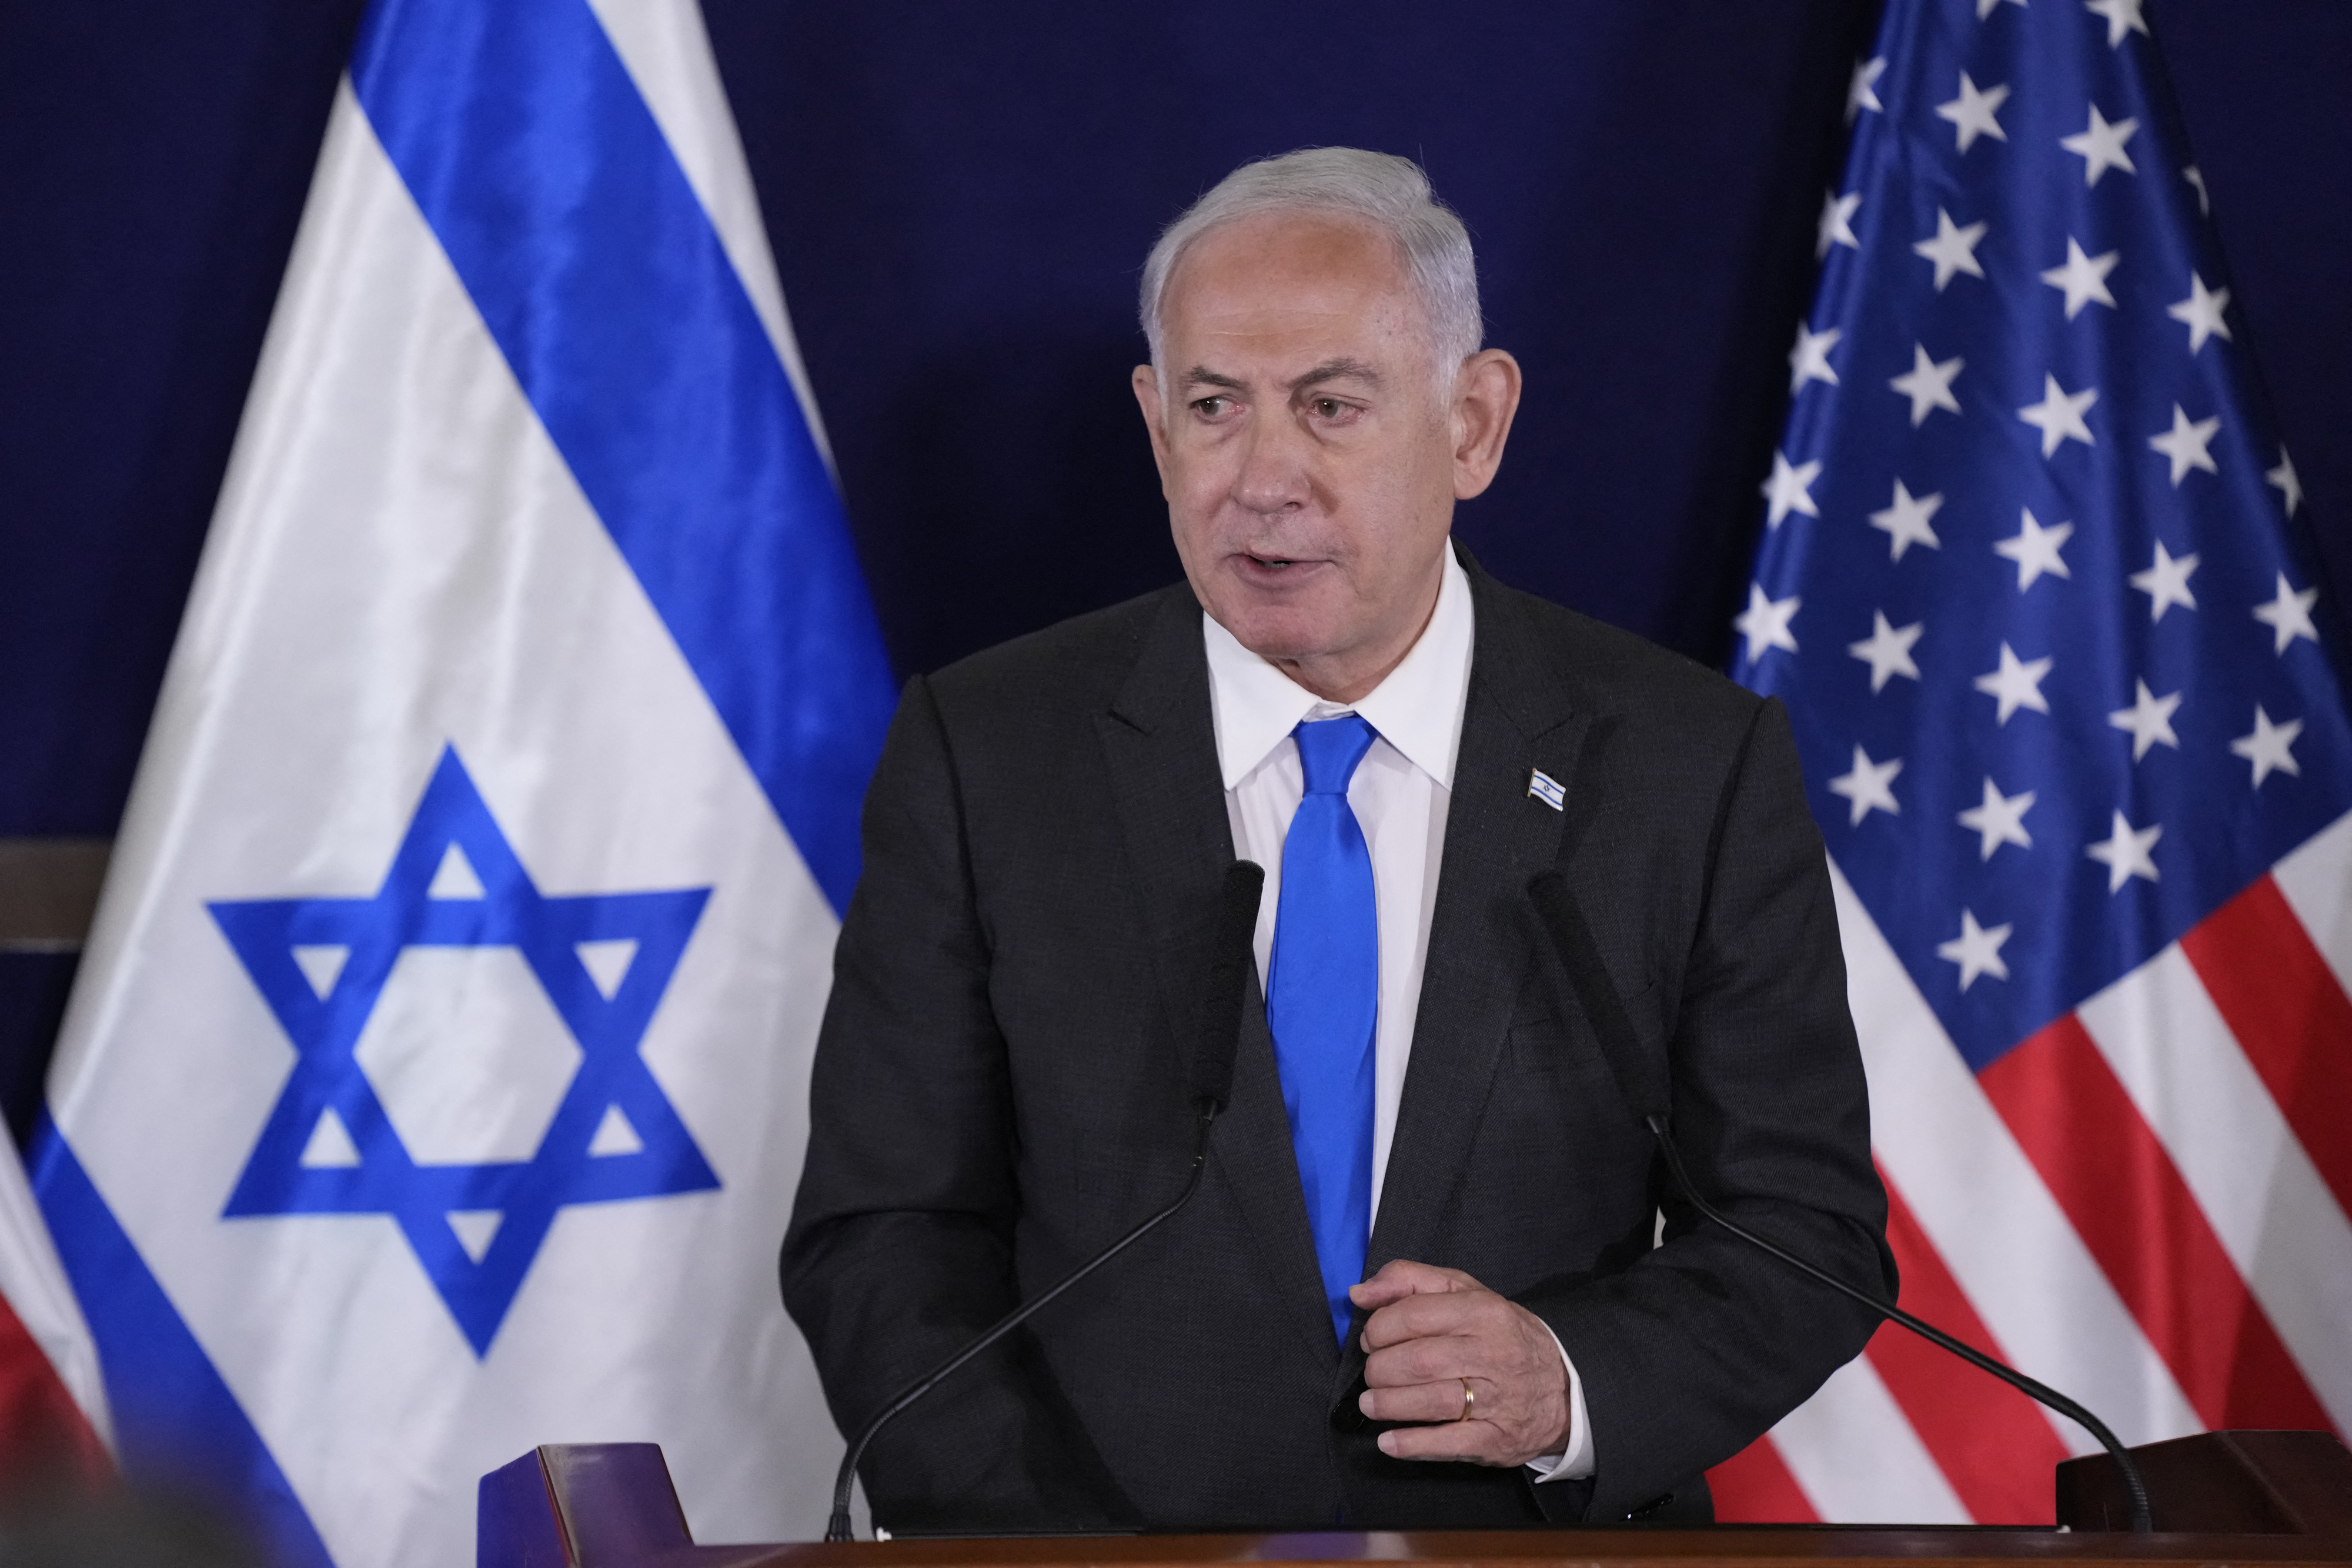 Benjamin Netanyahu stands at a podium with Israeli and American flags in the background. He is wearing a dark suit